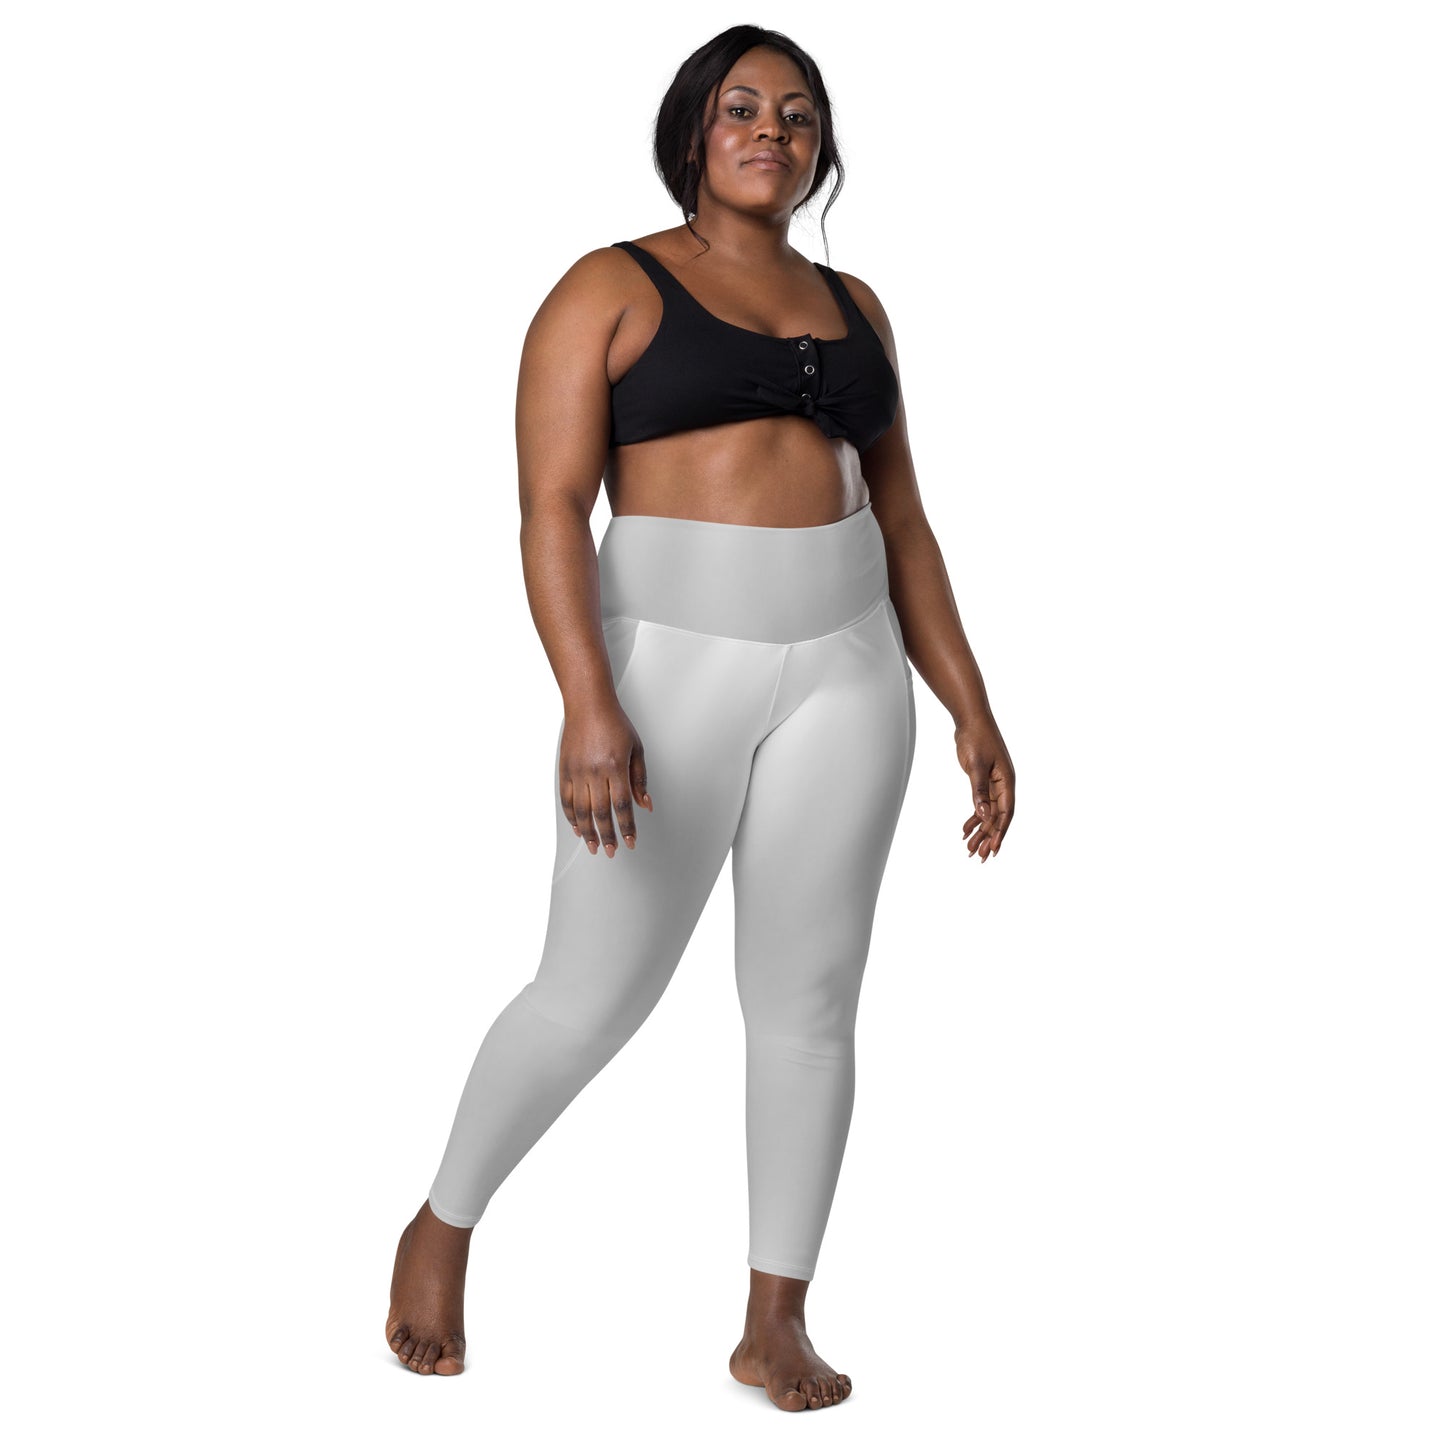 LBS Silver Spotlight Leggings with Pockets - Plus Size